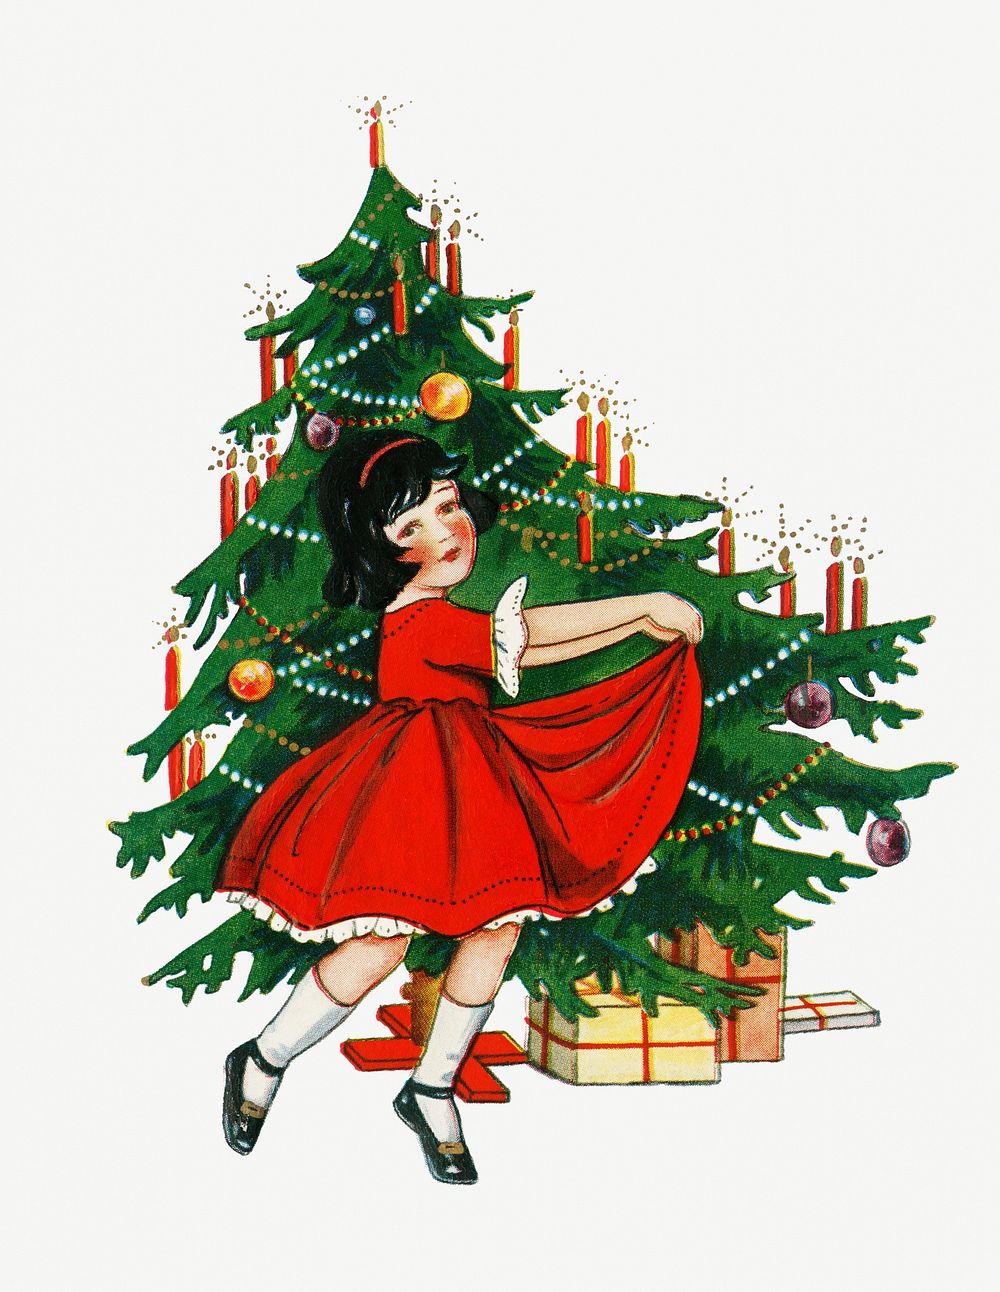 Little girl dancing next to a Christmas tree with gift boxes underneath